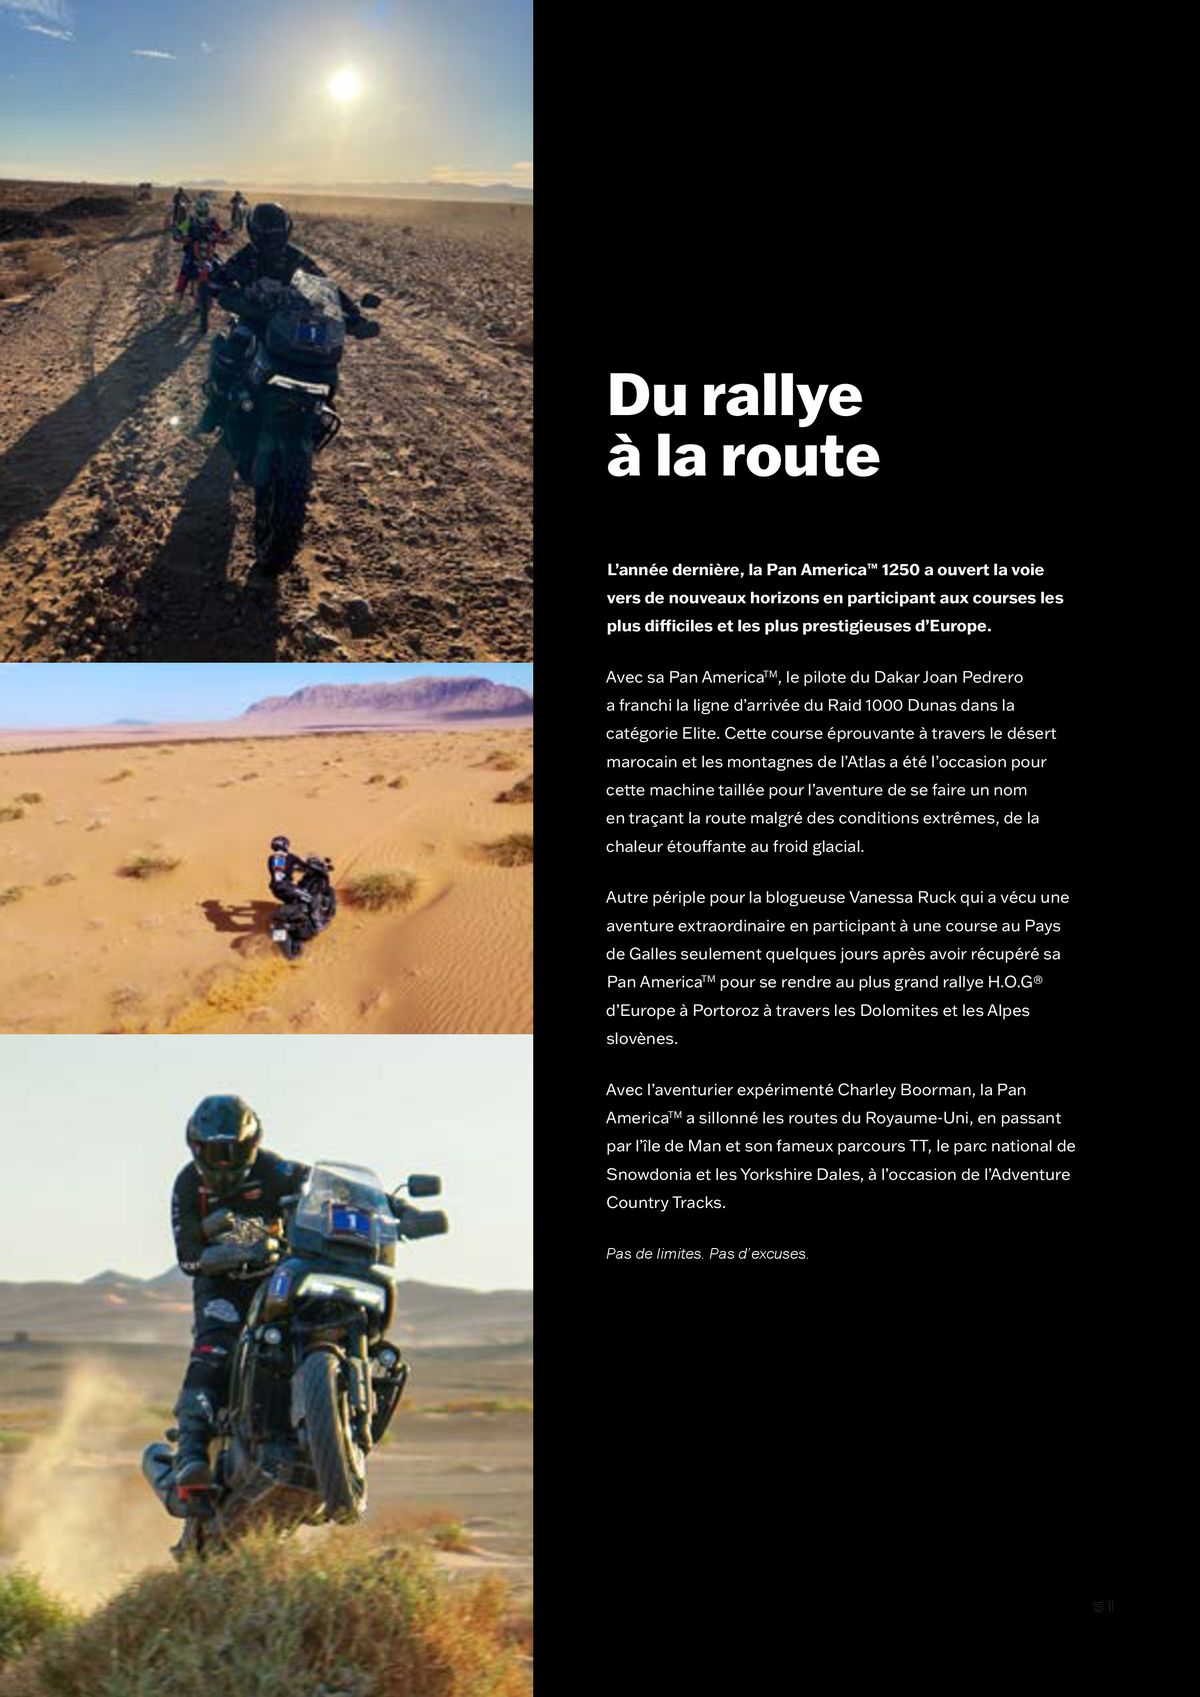 Catalogue Nouvelle Gamme Harley-Davidson, page 00051